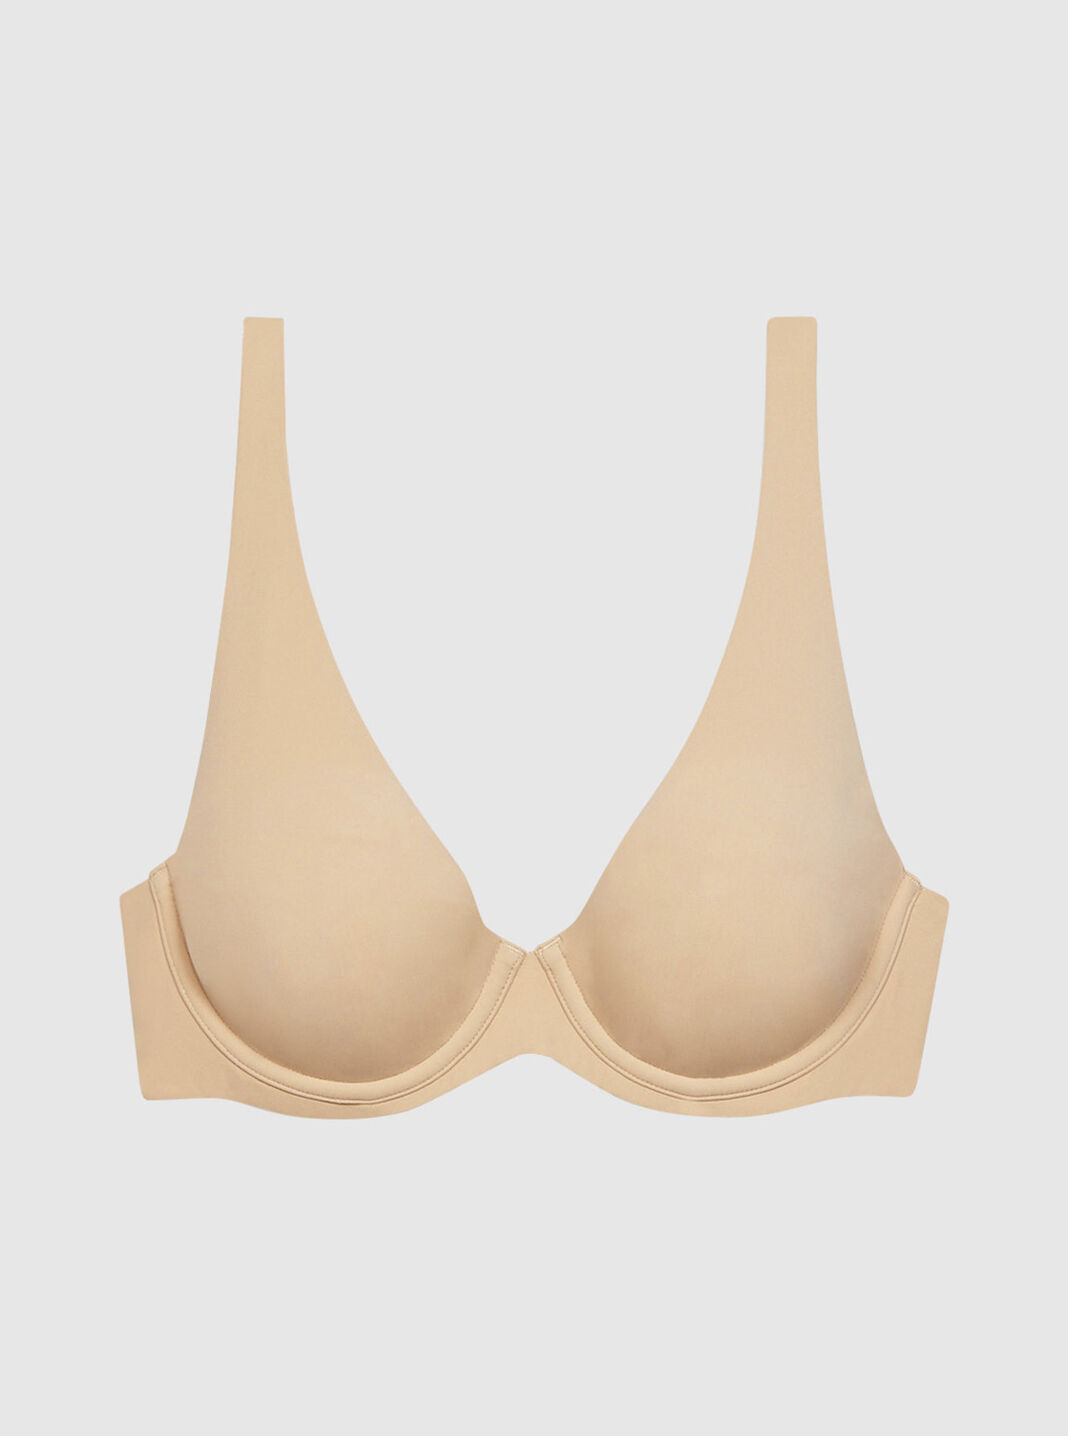  Full Figure Bras for Women No Underwire Comfy Bra for Plus Size T  Shirt Bras Wine S : Clothing, Shoes & Jewelry